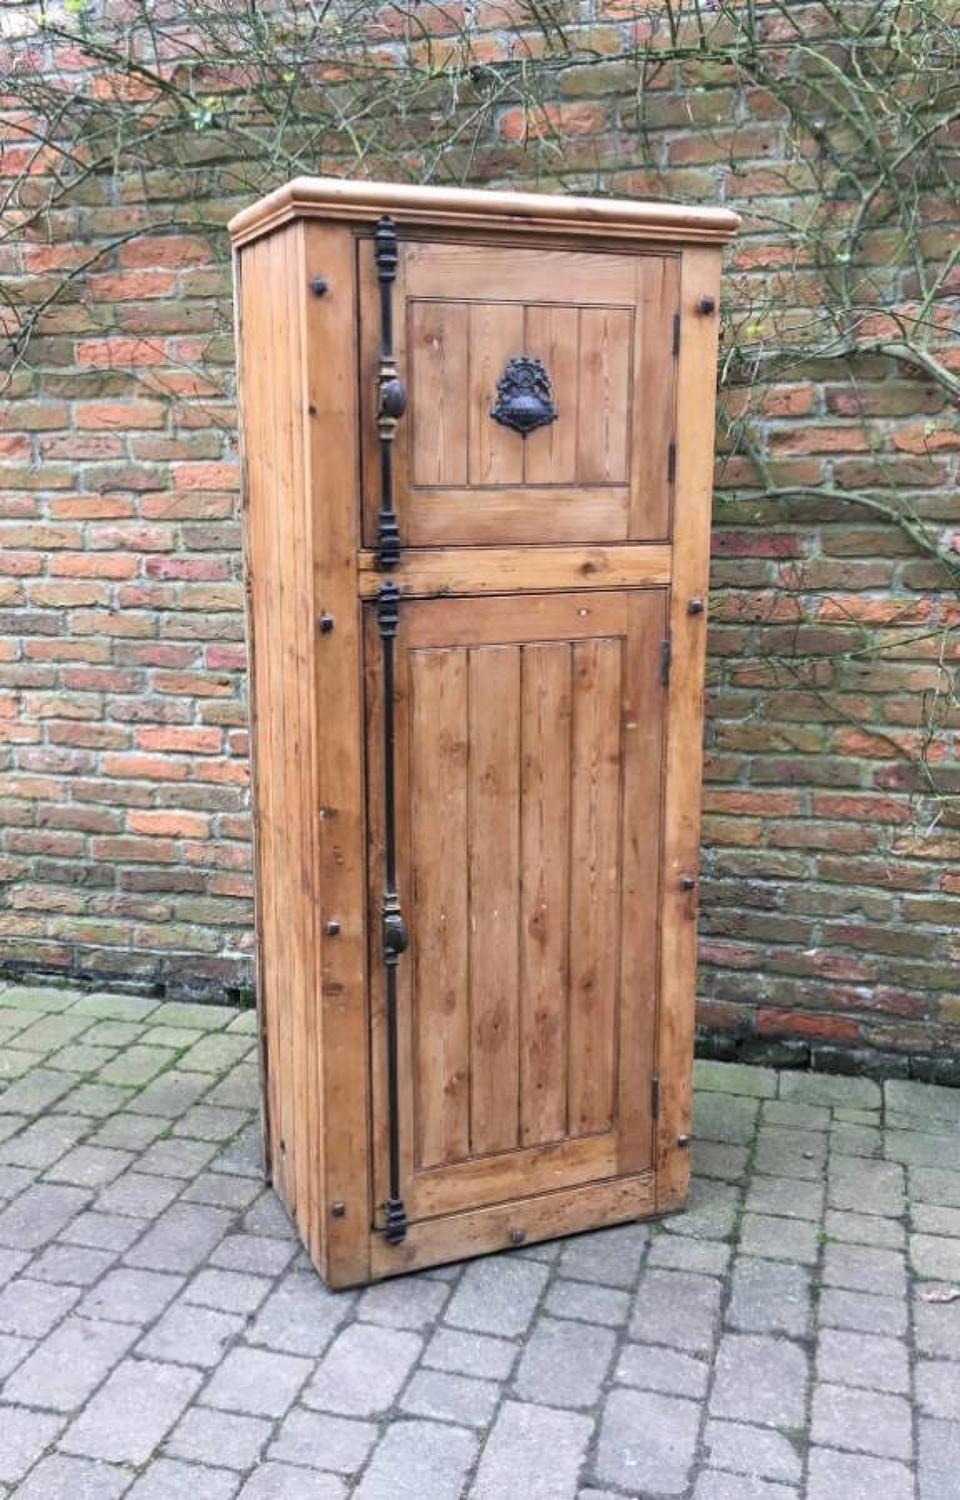 Late Victorian Pine Cupboard with Kents Iron Locking Mechanism - Spitl